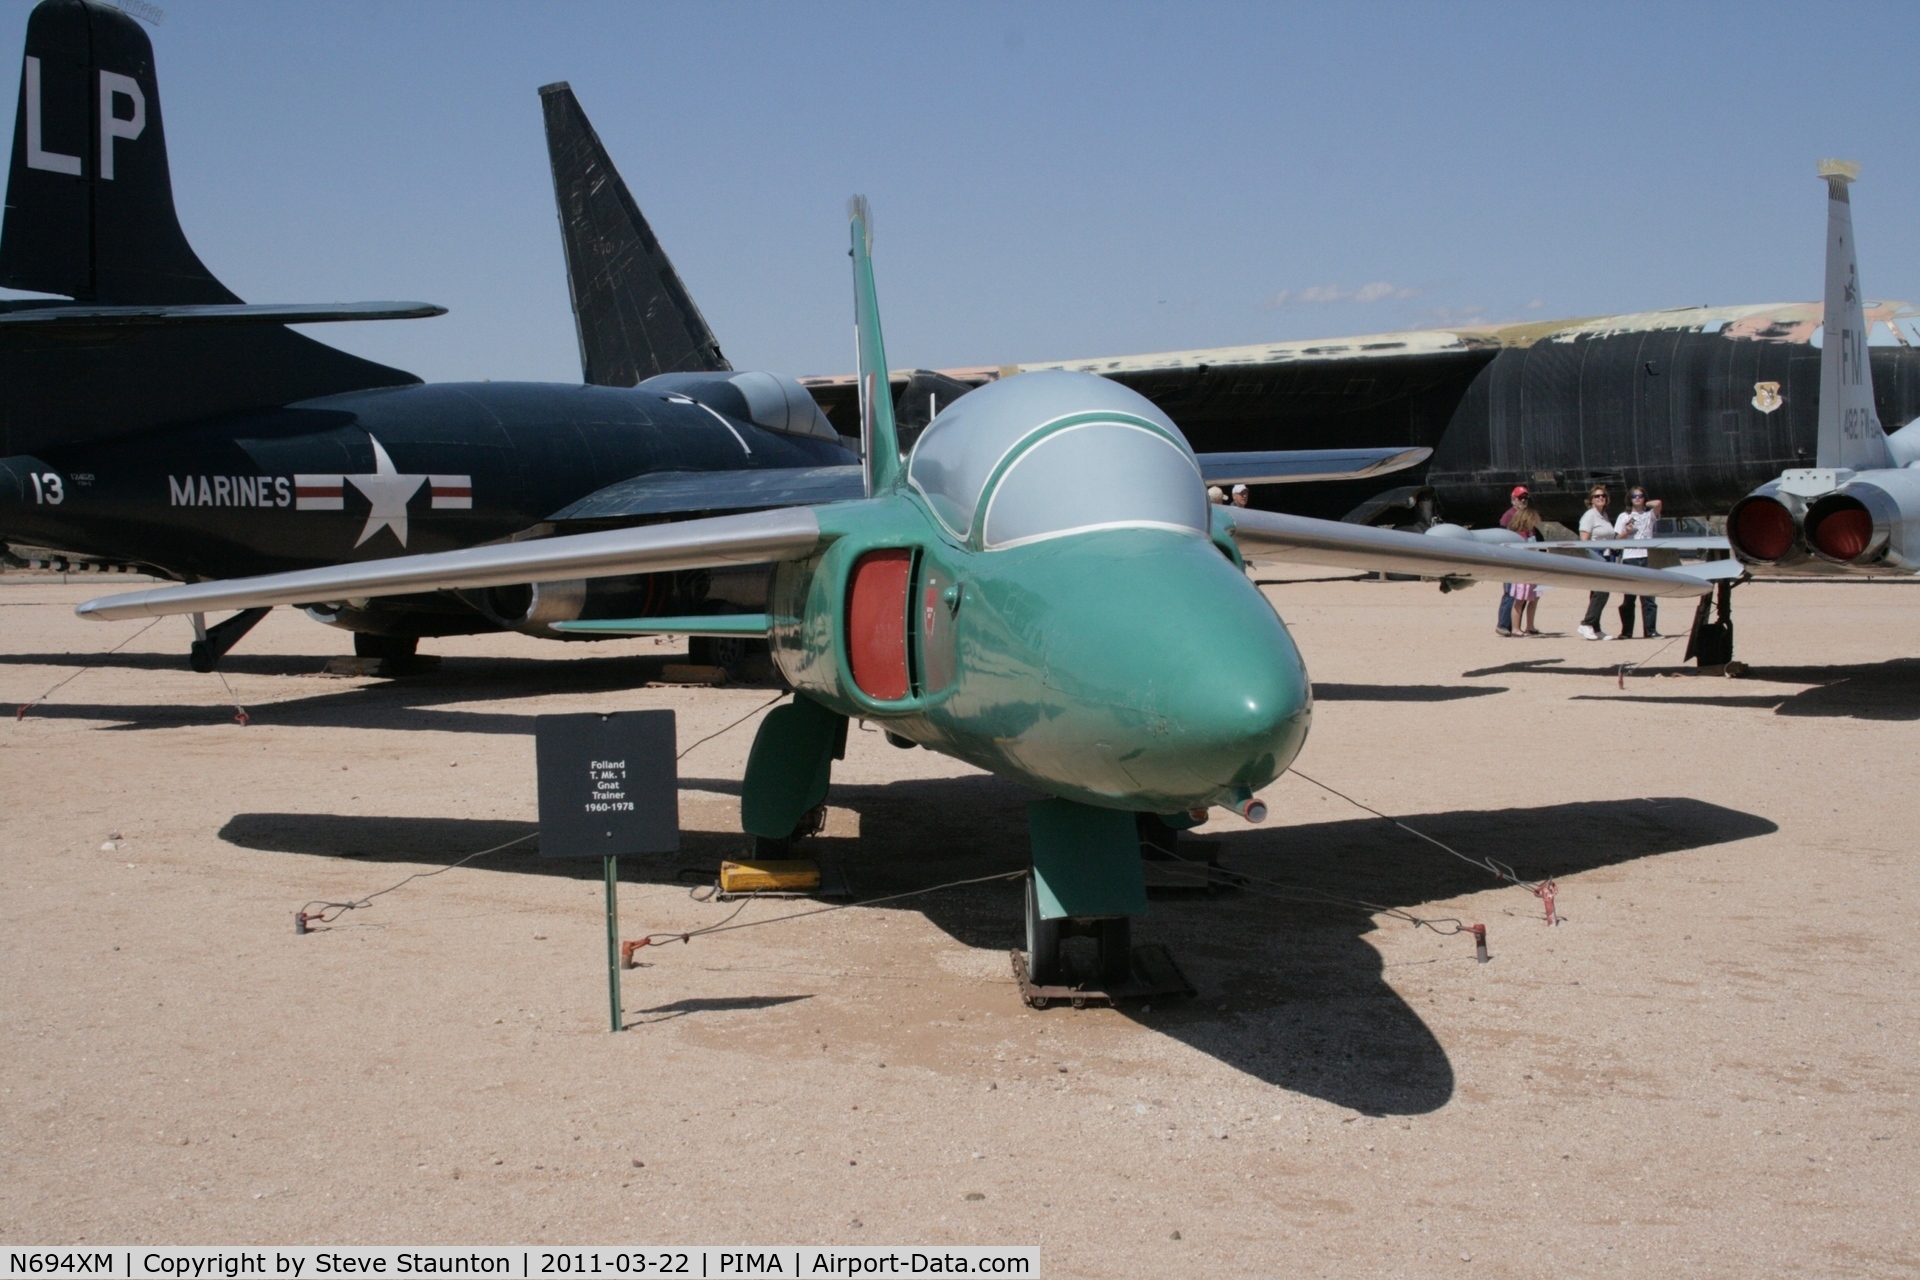 N694XM, 1960 Folland Gnat T.1 C/N FL504, Taken at Pima Air and Space Museum, in March 2011 whilst on an Aeroprint Aviation tour